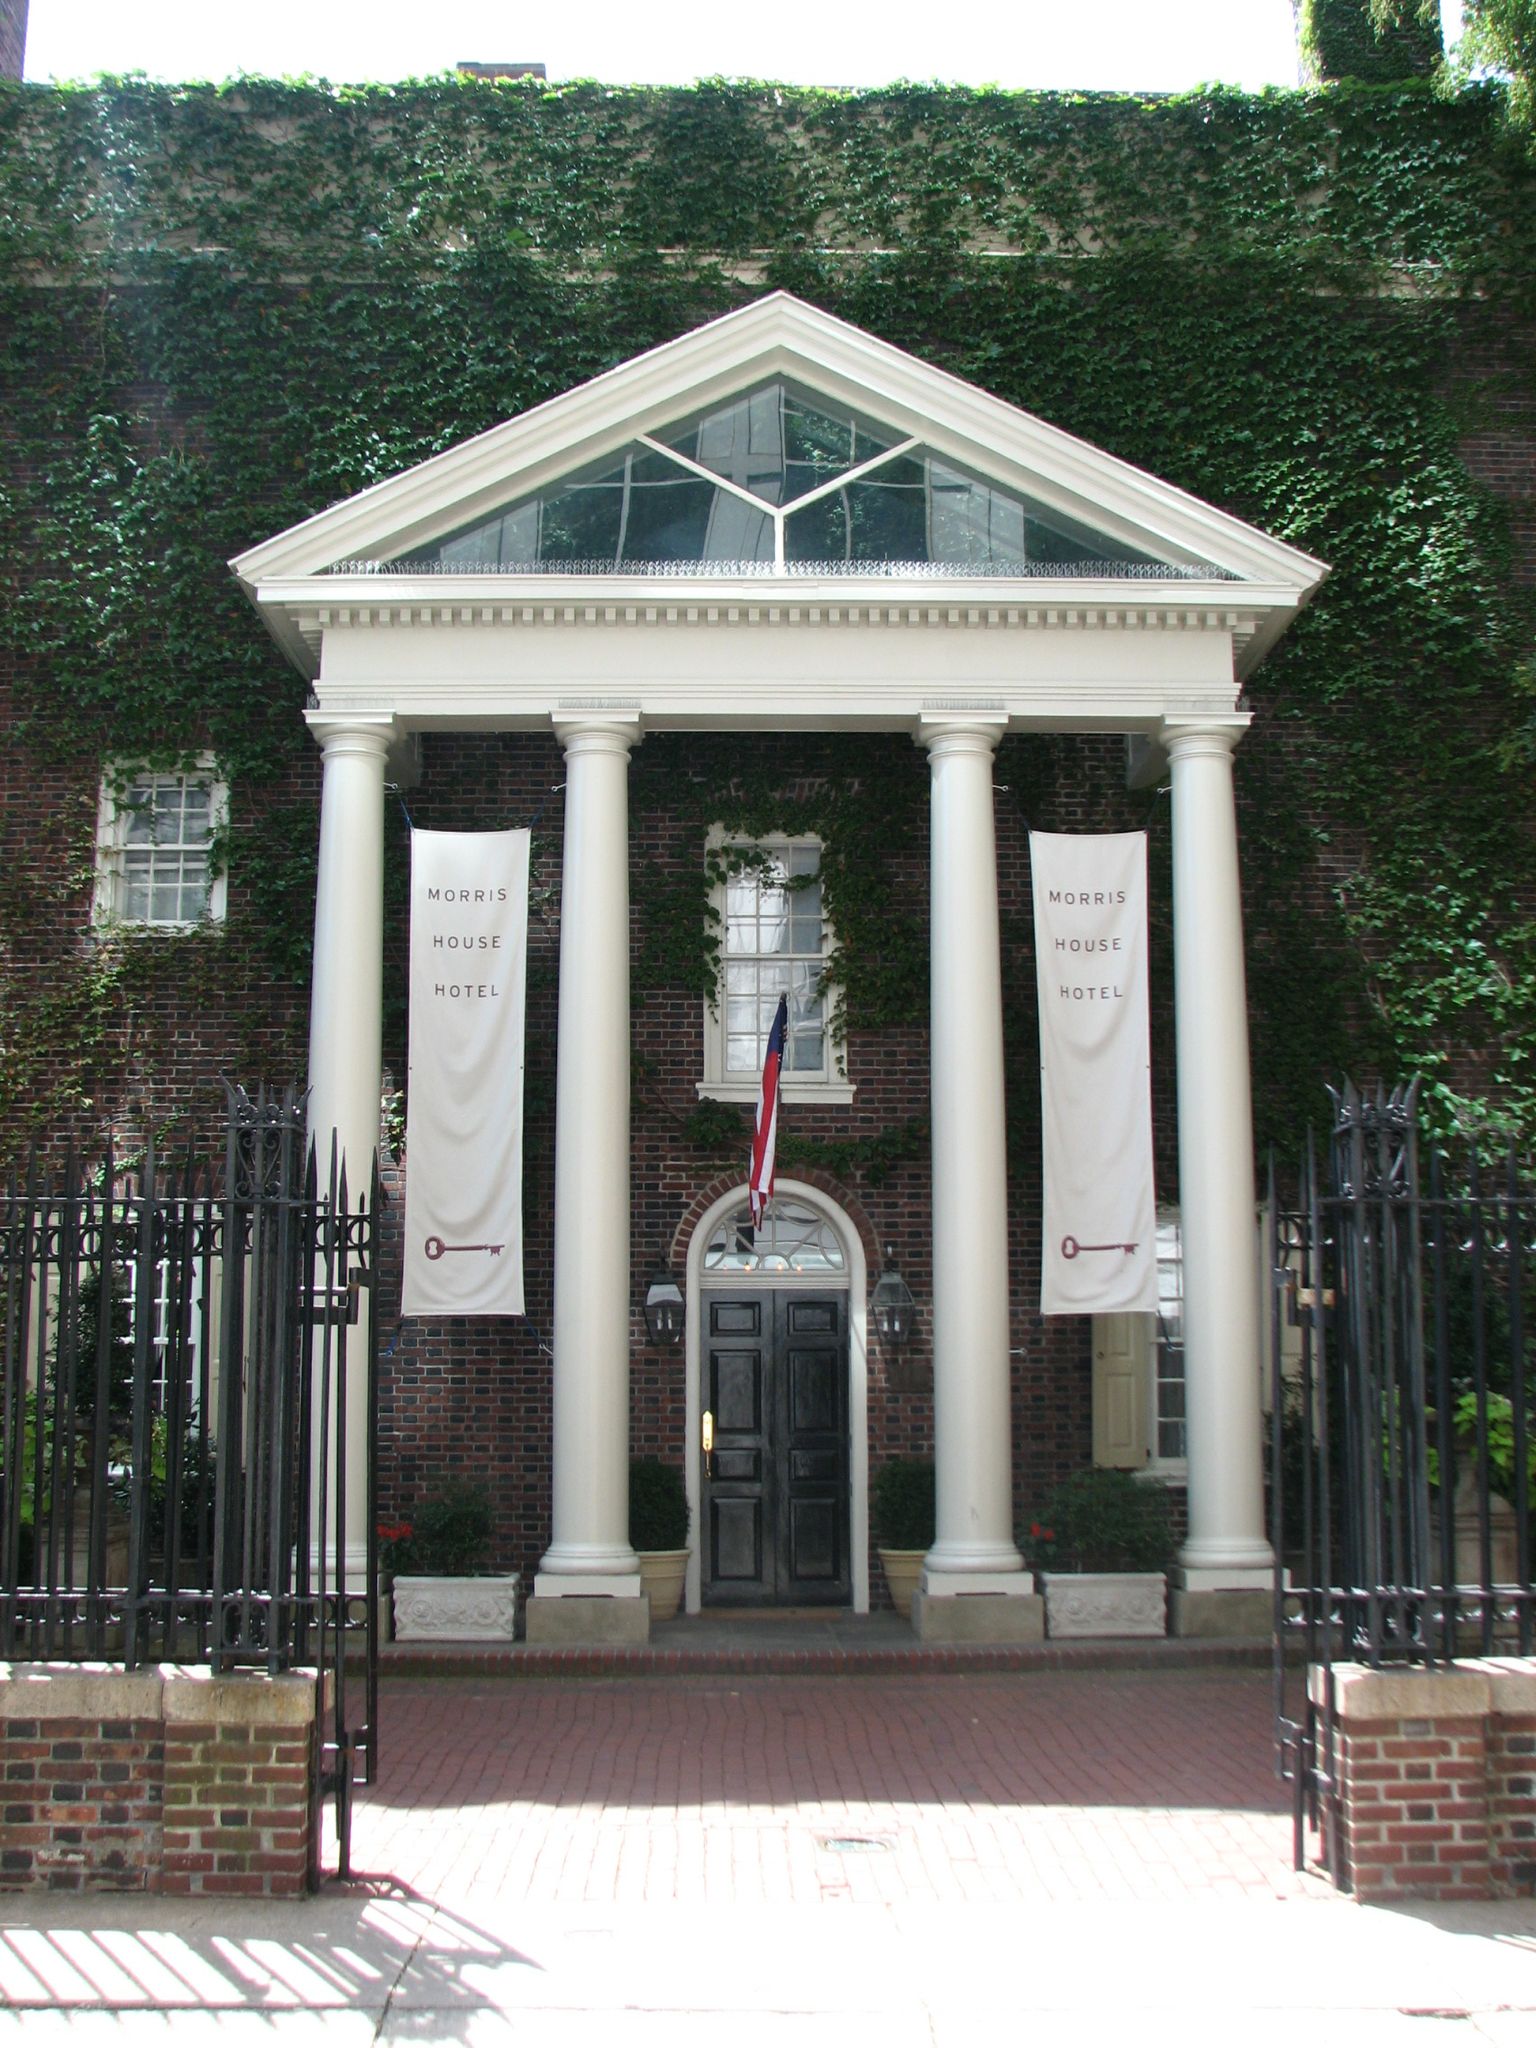 The grand entrance to the Morris House Hotel is on St. James Street.